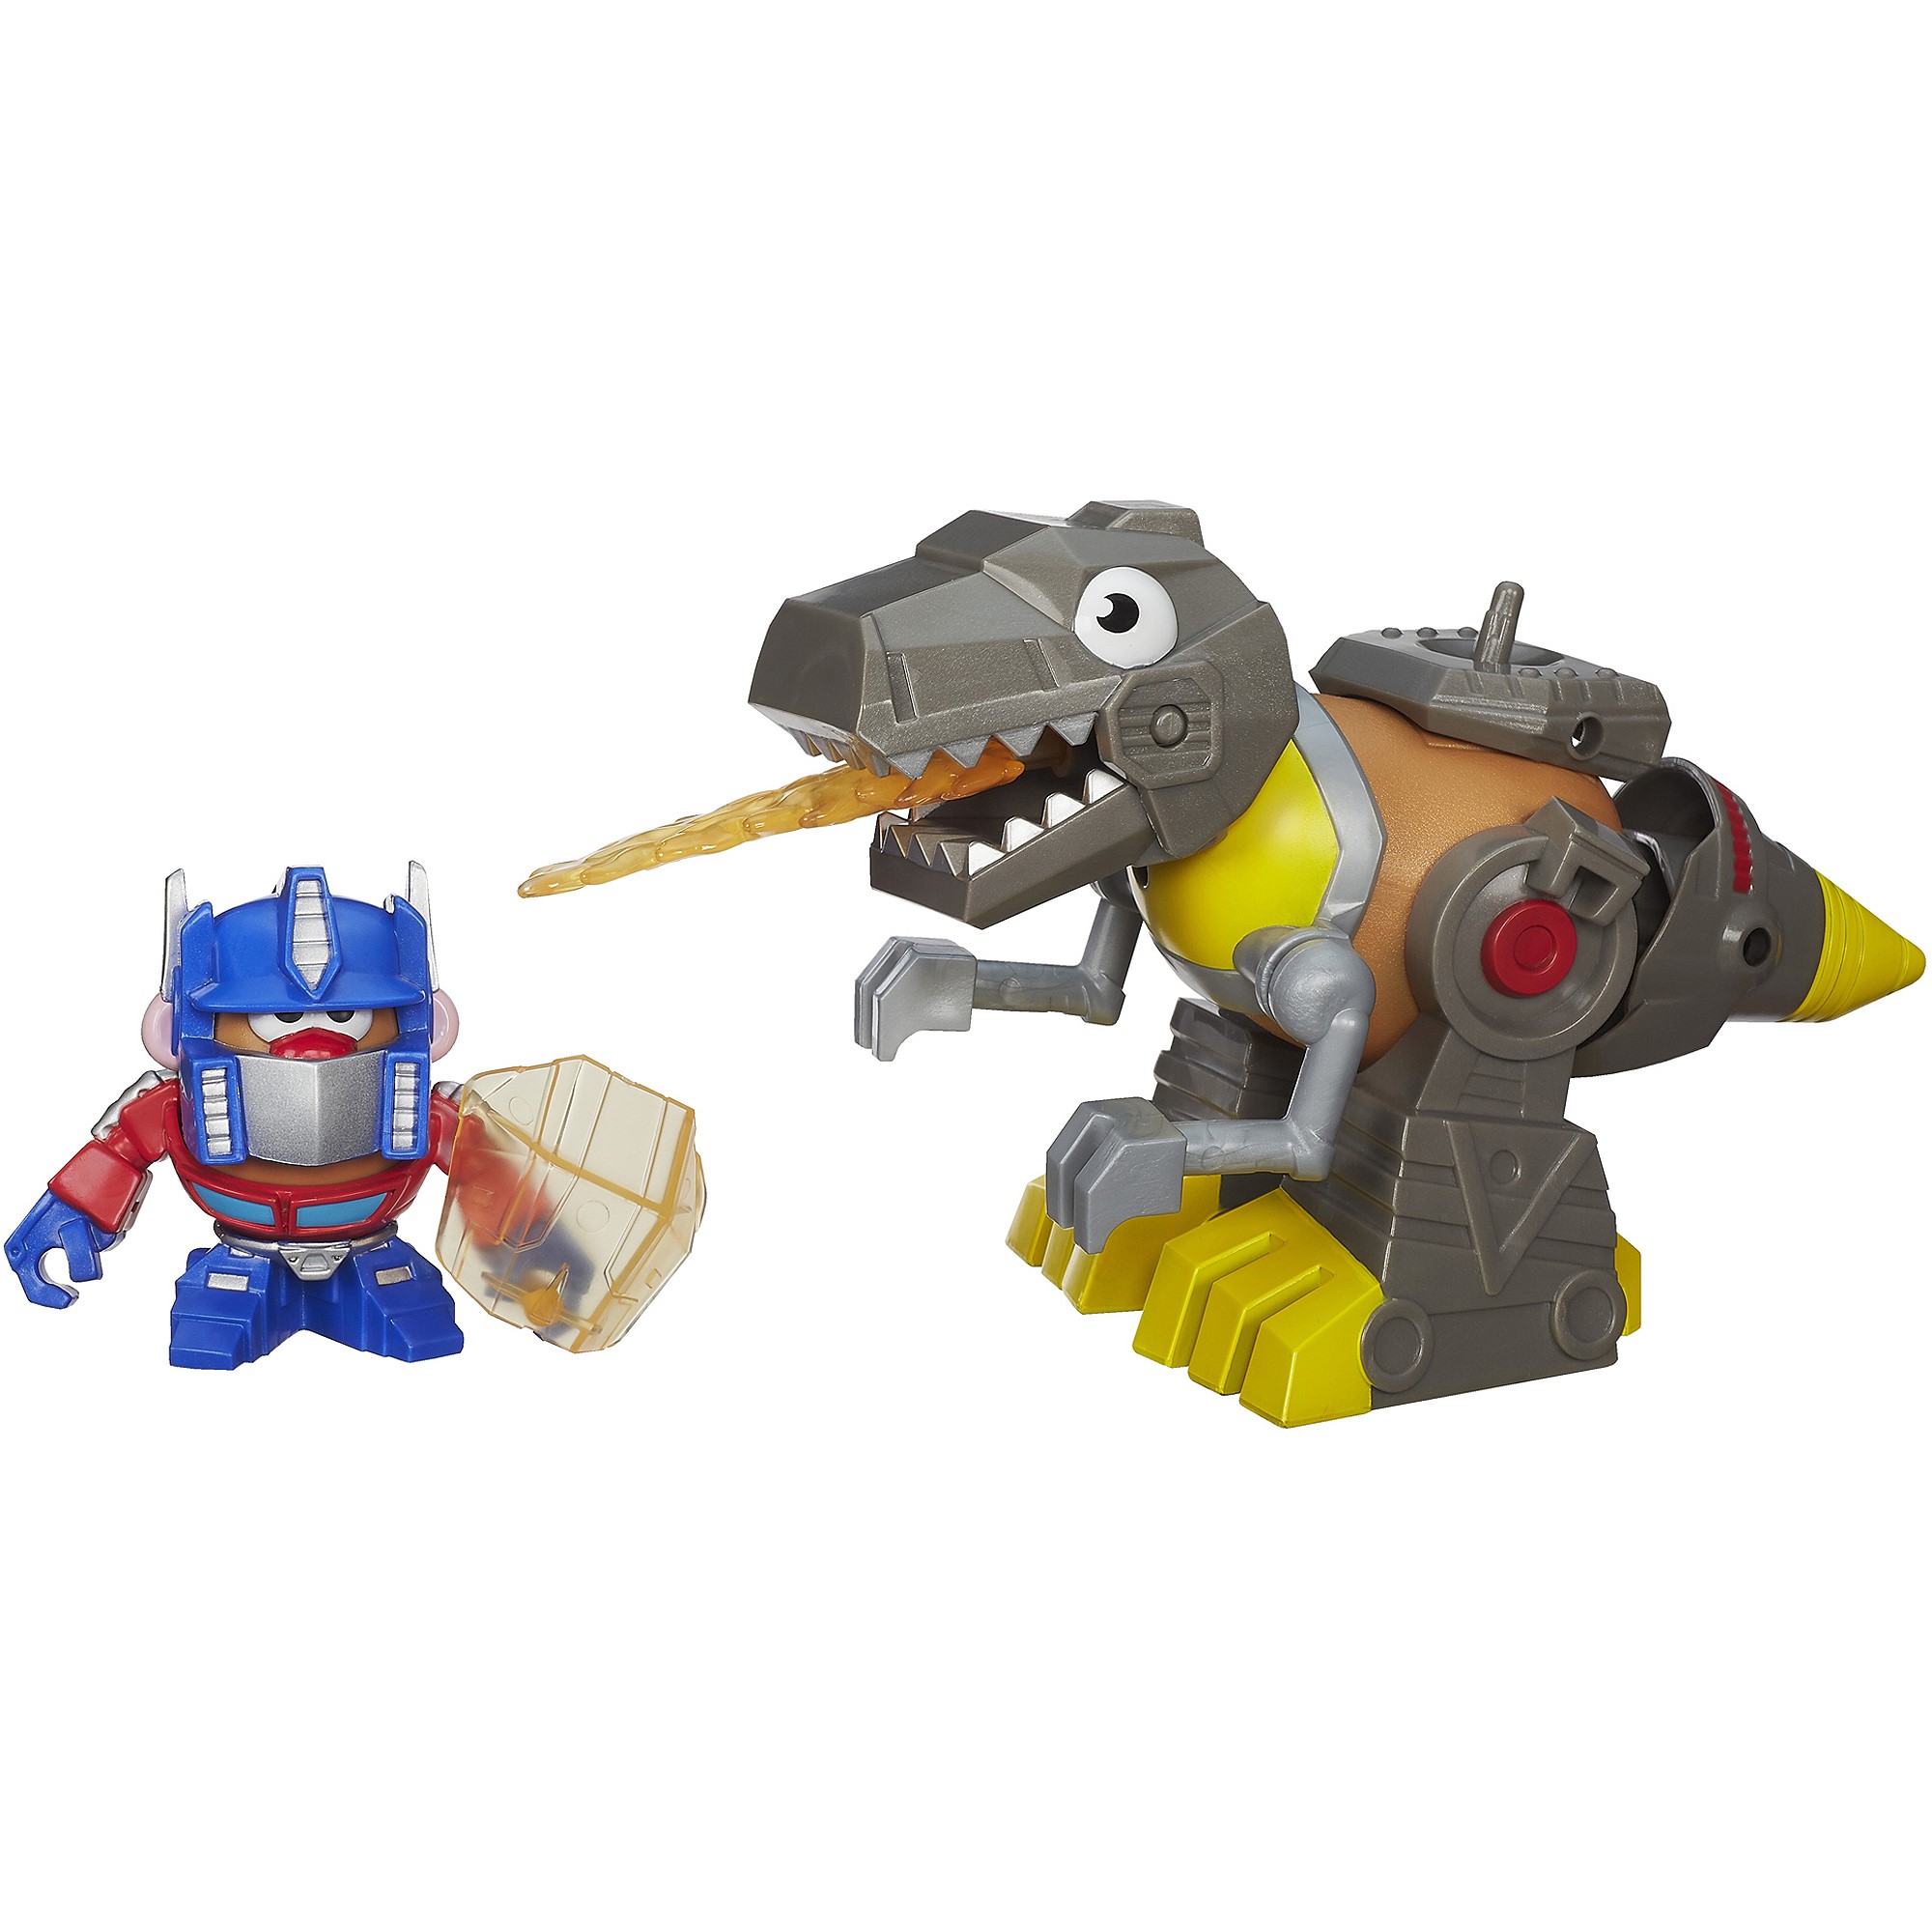 Mr. Potato Head Transformers Mixable Mashable Heroes as Optimus Prime and Grimlock Figures - image 1 of 3